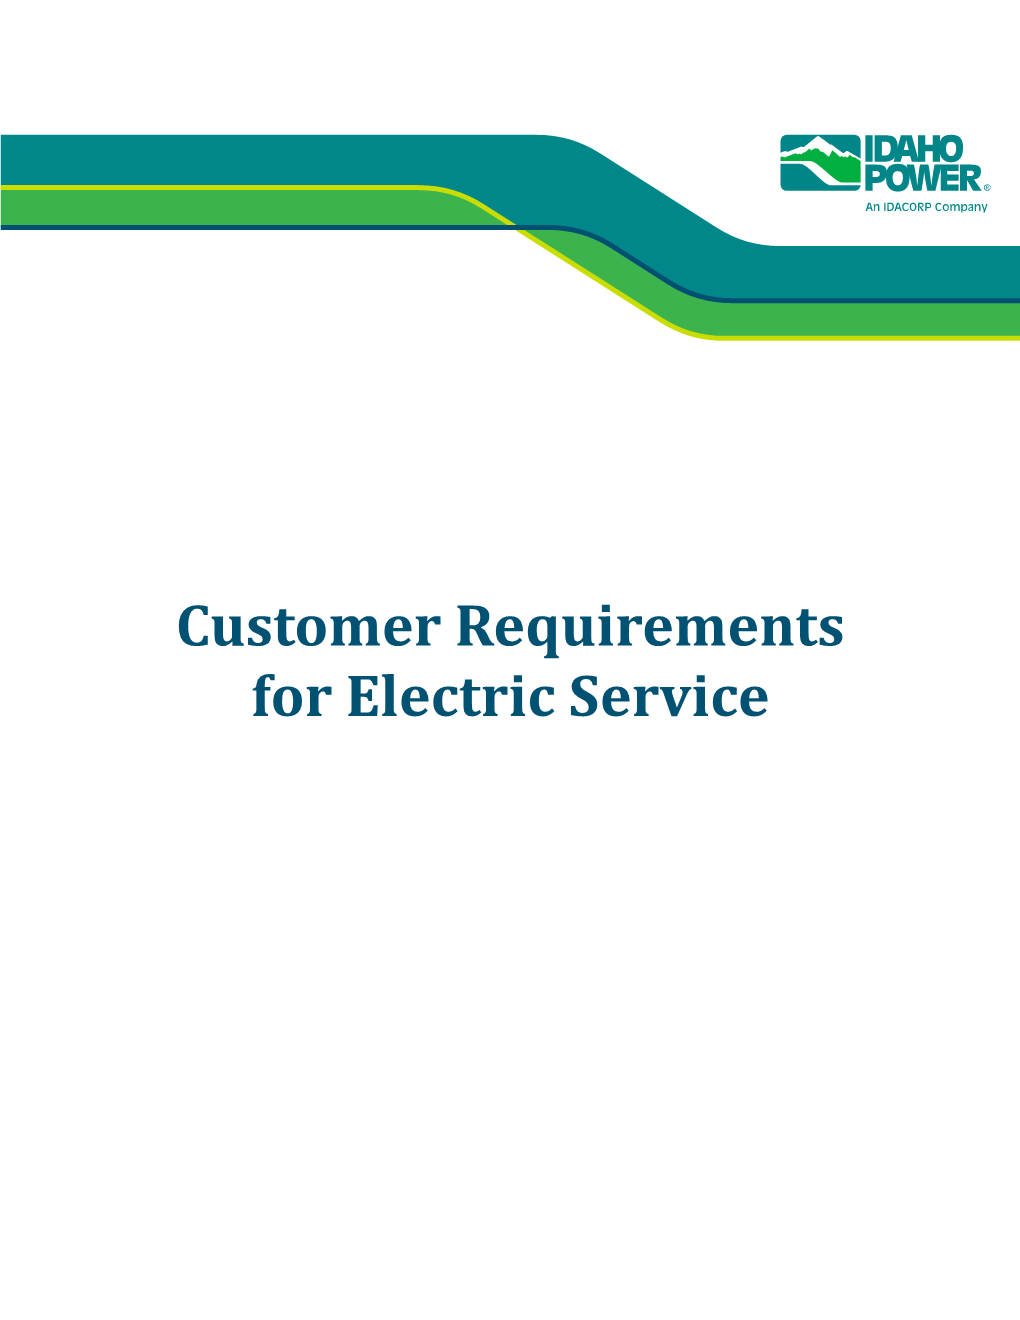 Customer Requirements for Electric Service Customer Requirements for Electric Service